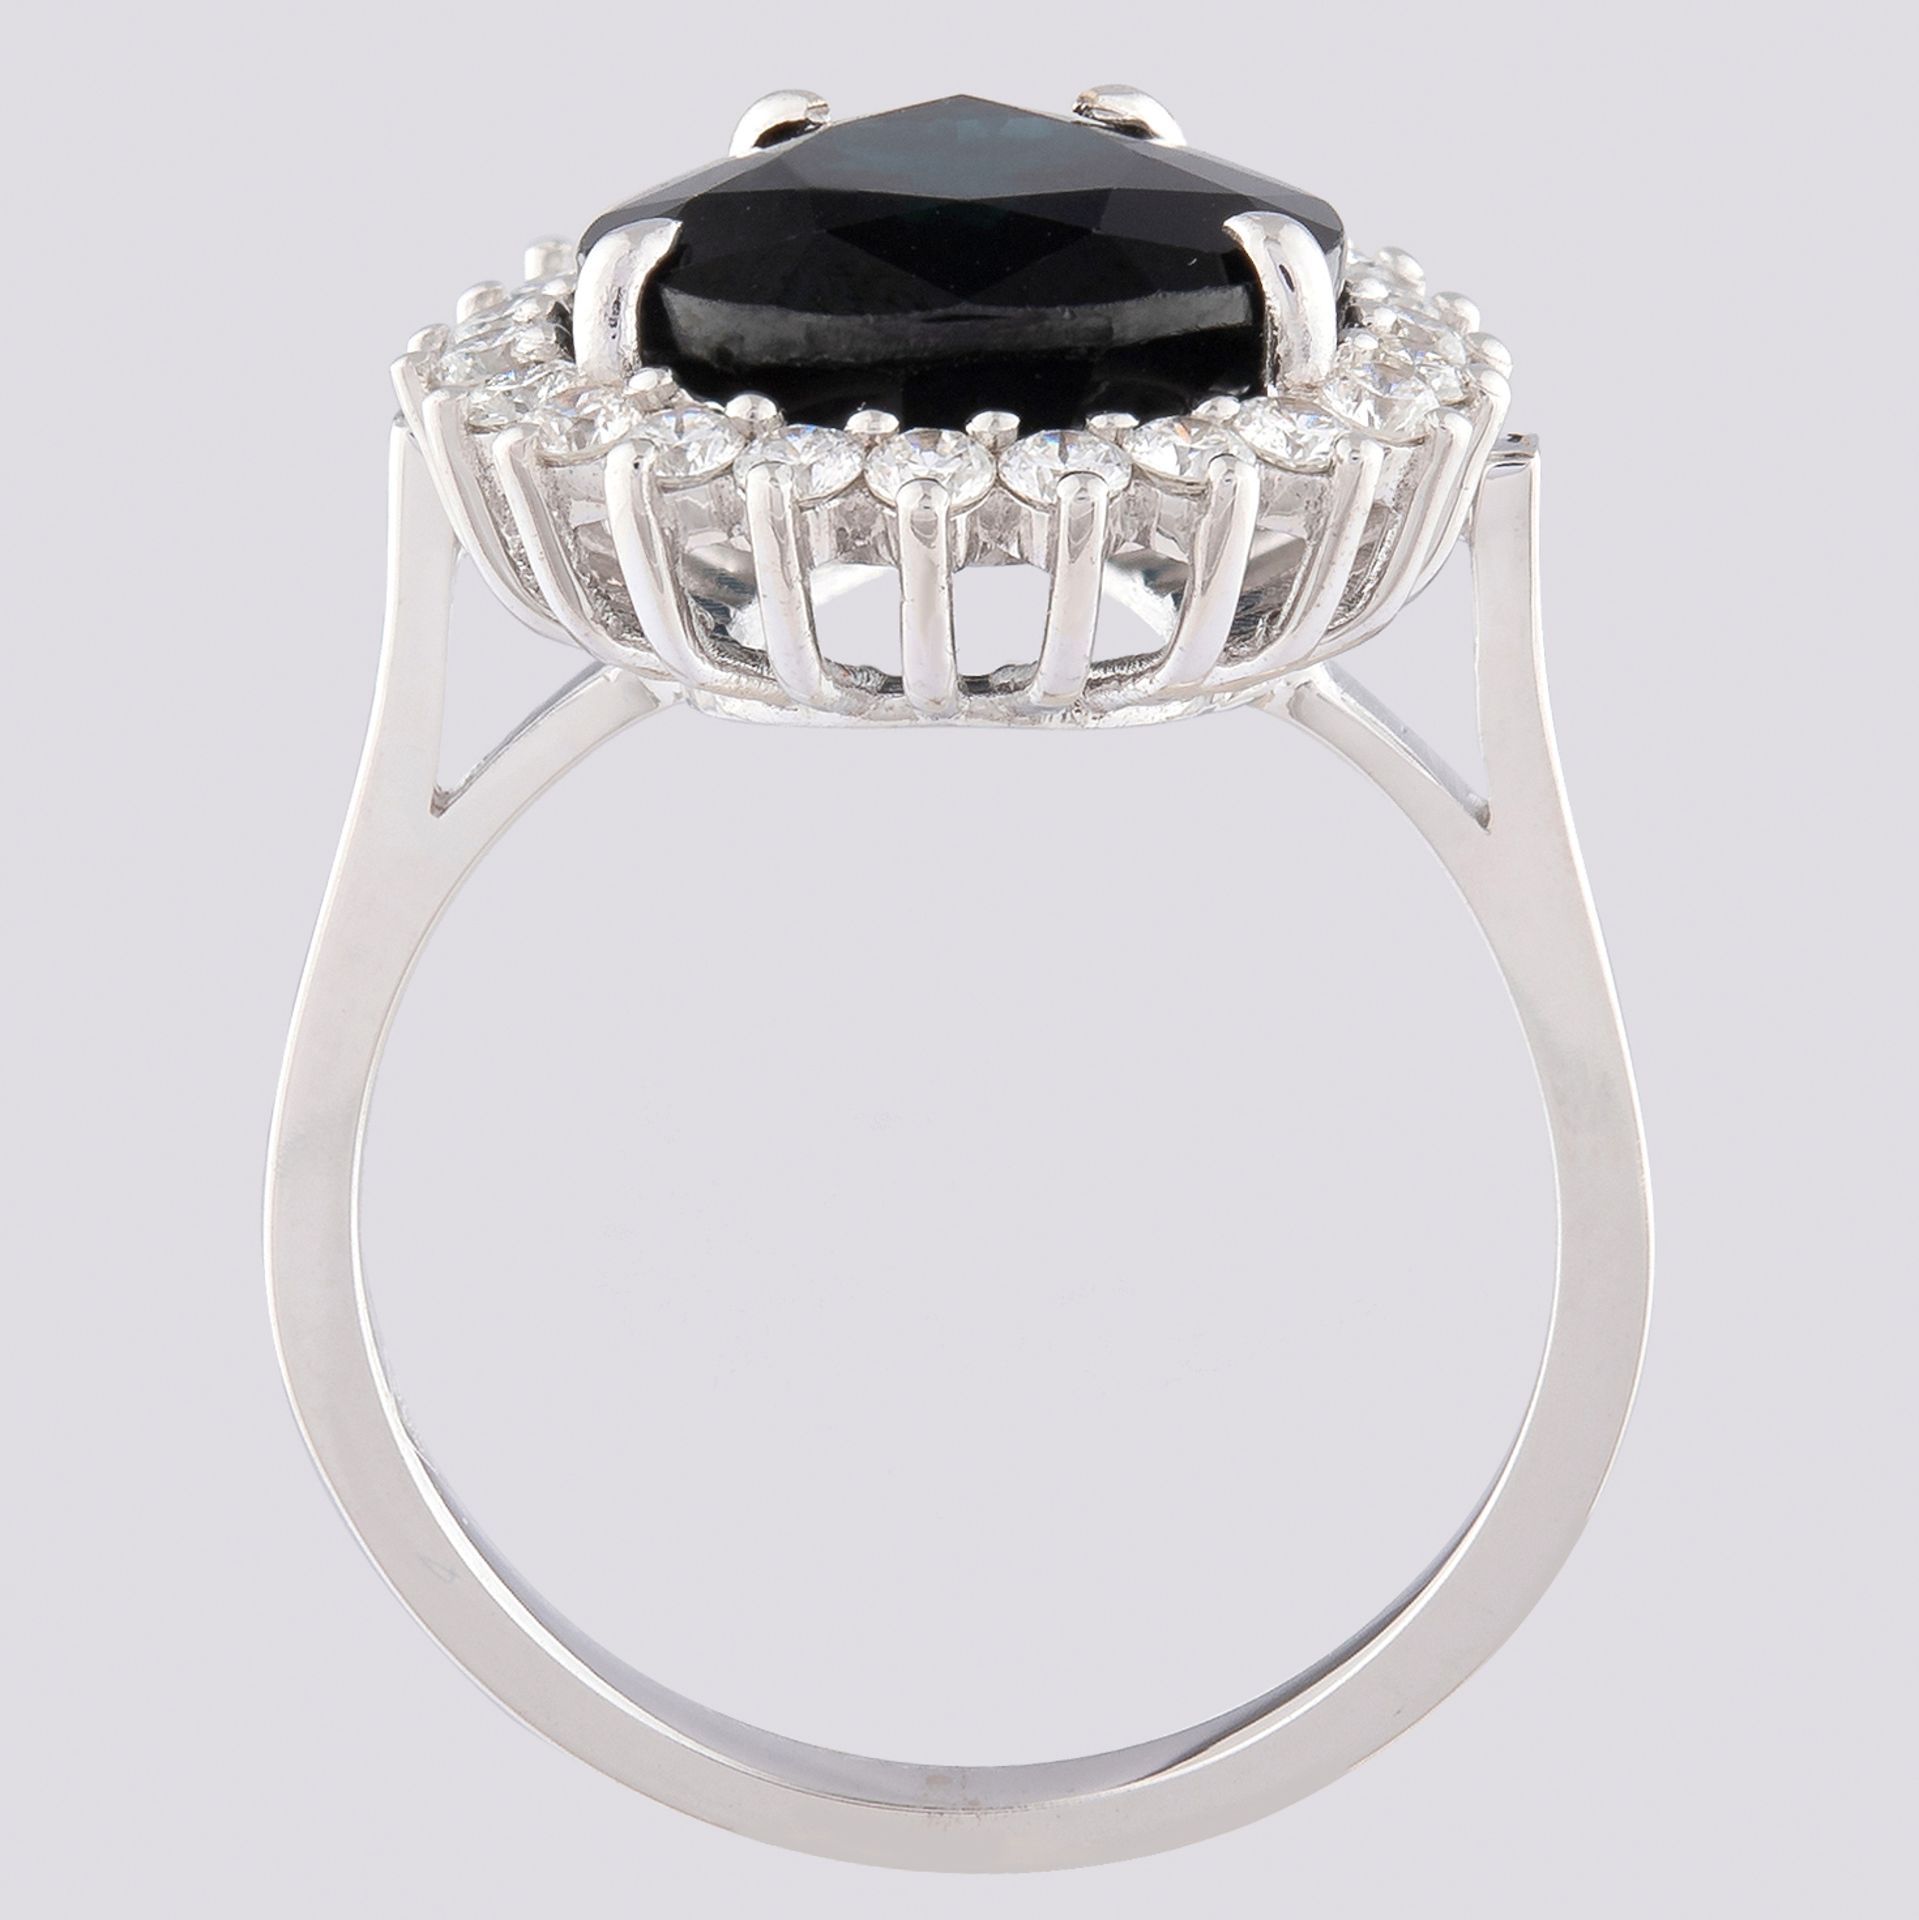 Certificated 14K White Gold Diamond & Sapphire Ring - Image 2 of 4